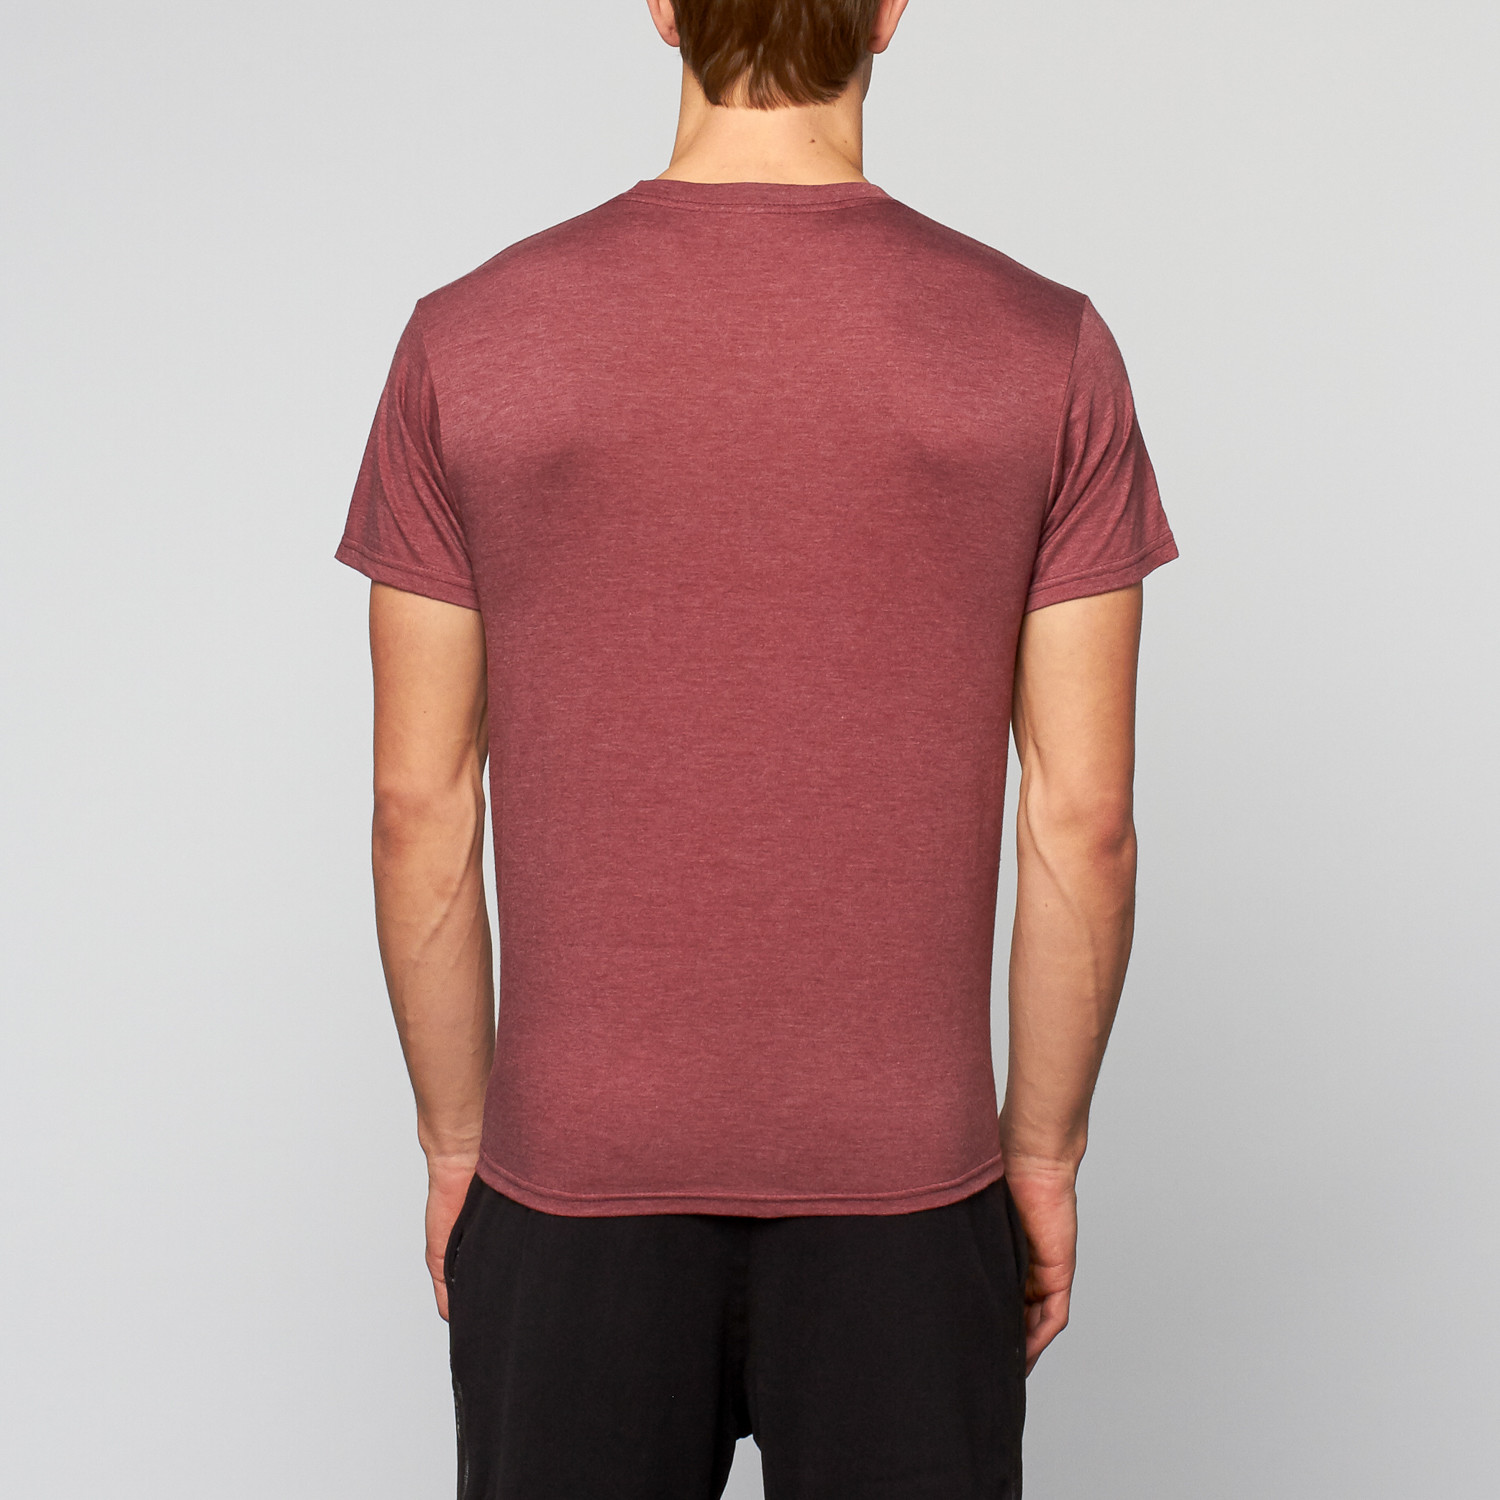 Hellbird Tee // Heather Burgundy (S) - Athletic Recon - Touch of Modern